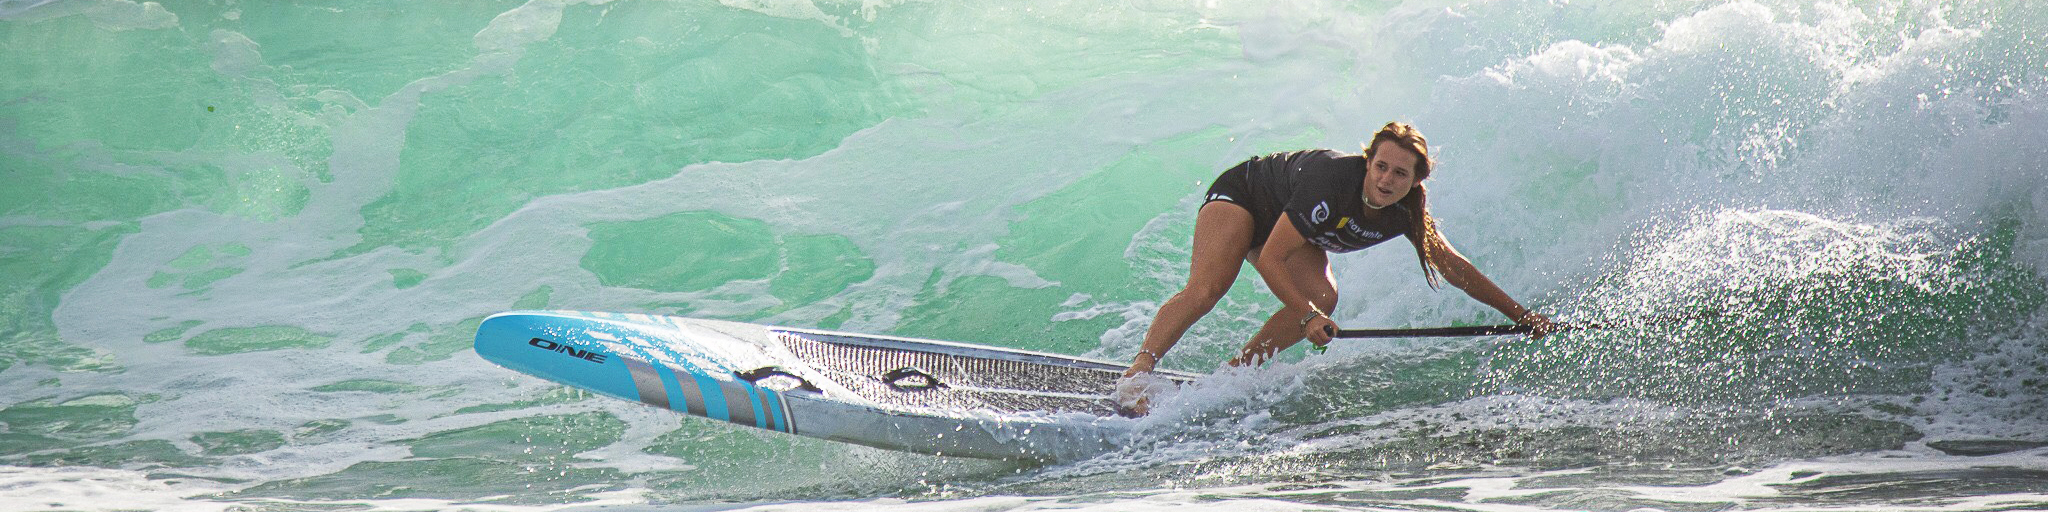 maddie mcasey nz sup champs